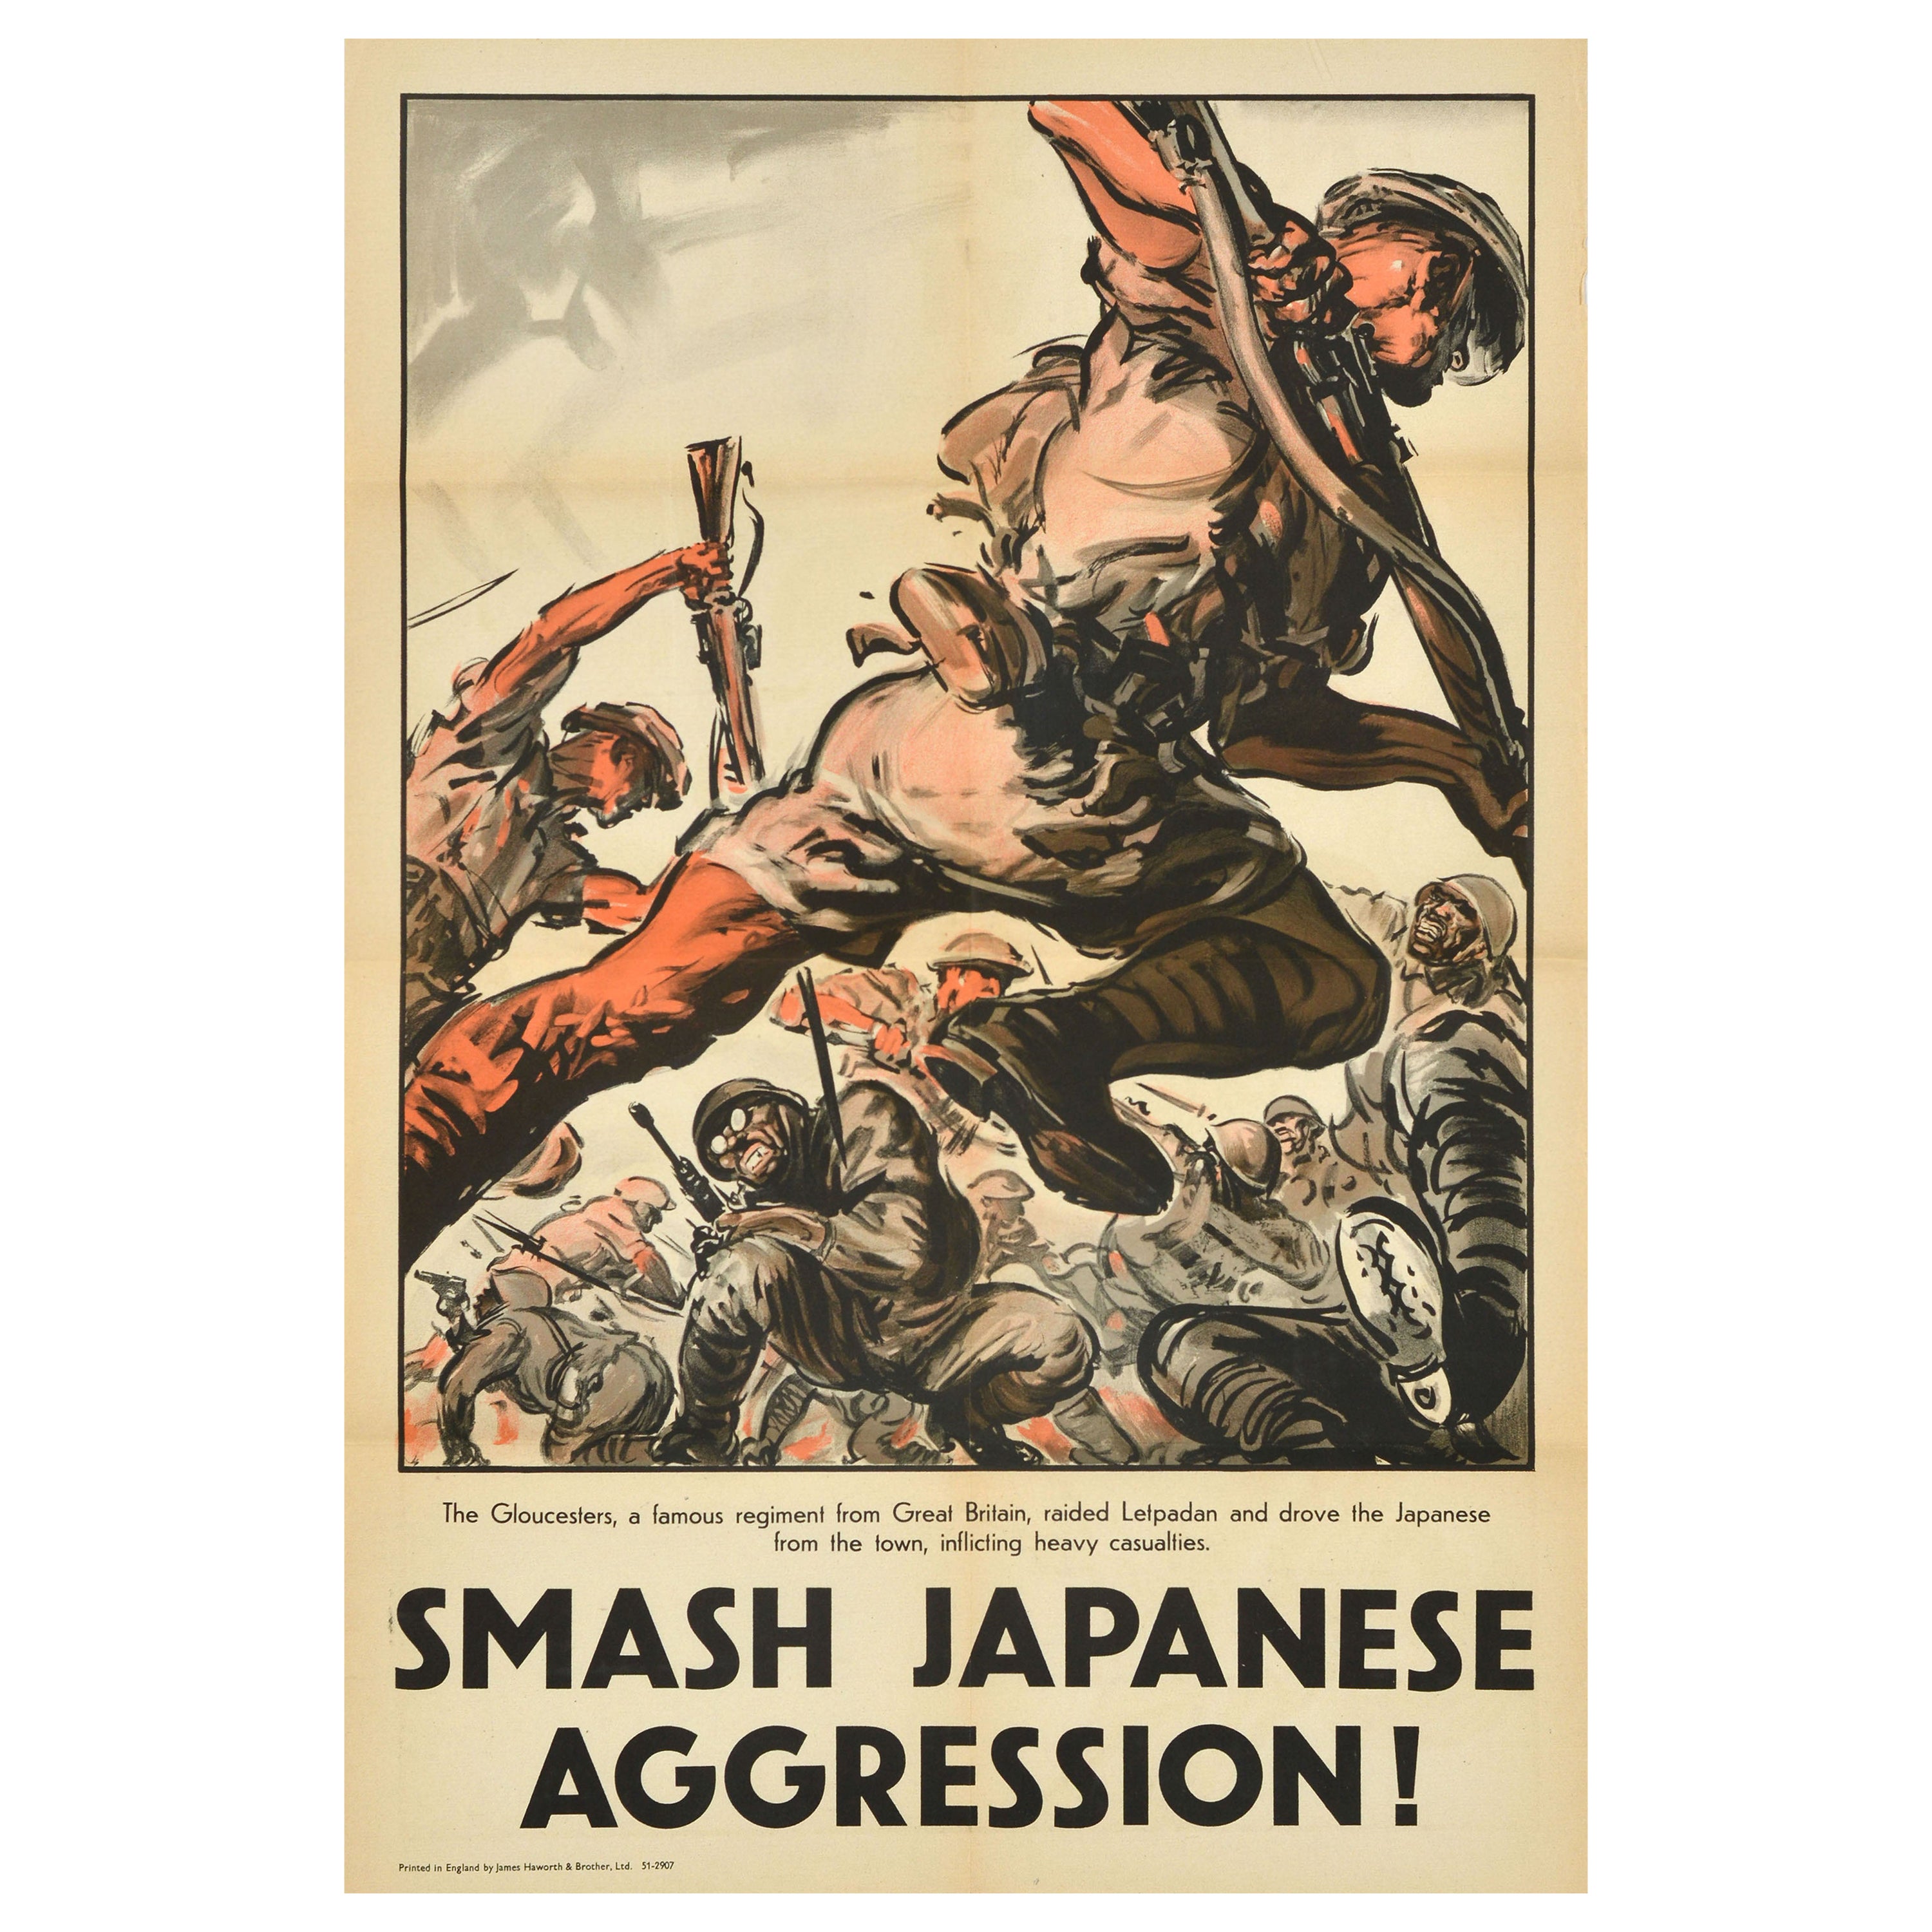 Original Vintage War Propaganda Poster Smash Japanese Aggression WWII Glosters For Sale